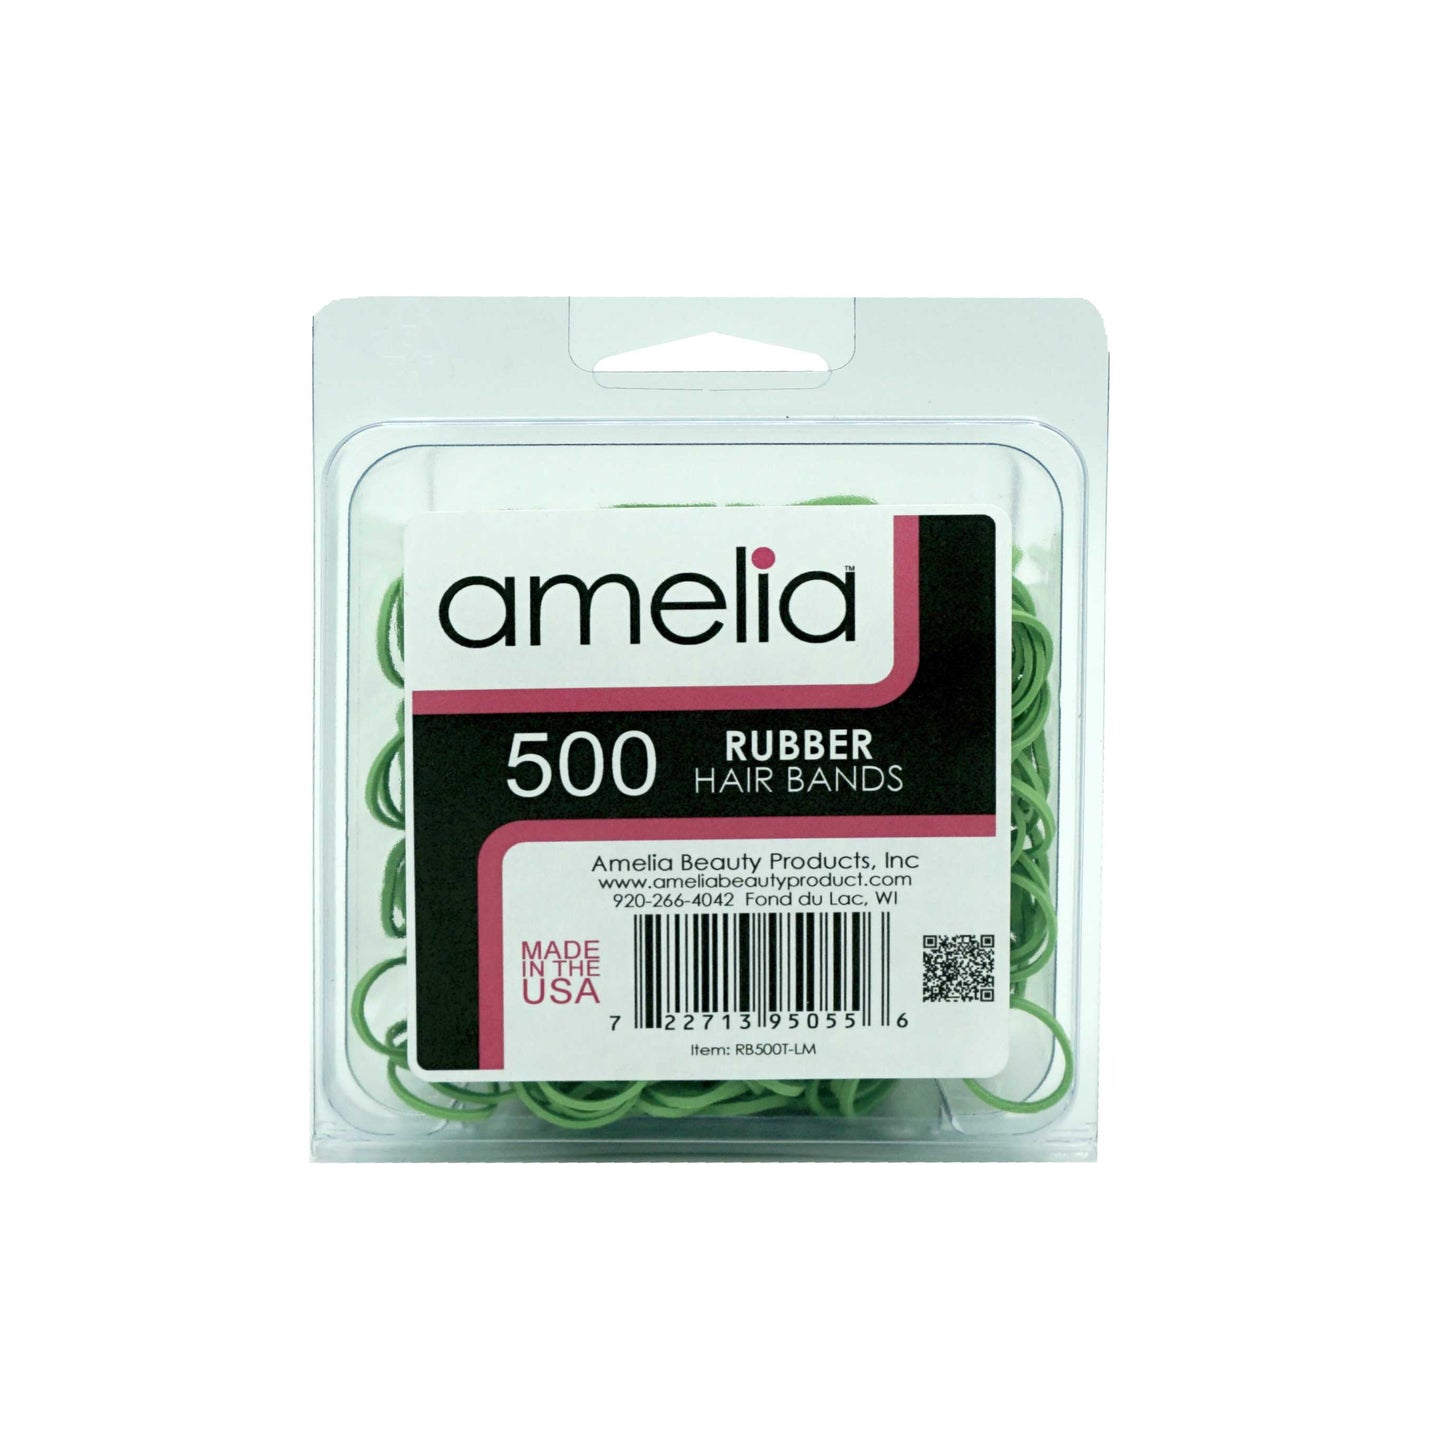 Amelia Beauty | 1/2in, Lime, Elastic Rubber Band Pony Tail Holders | Made in USA, Ideal for Ponytails, Braids, Twists, Dreadlocks, Styling Accessories for Women, Men and Girls | 500 Pack